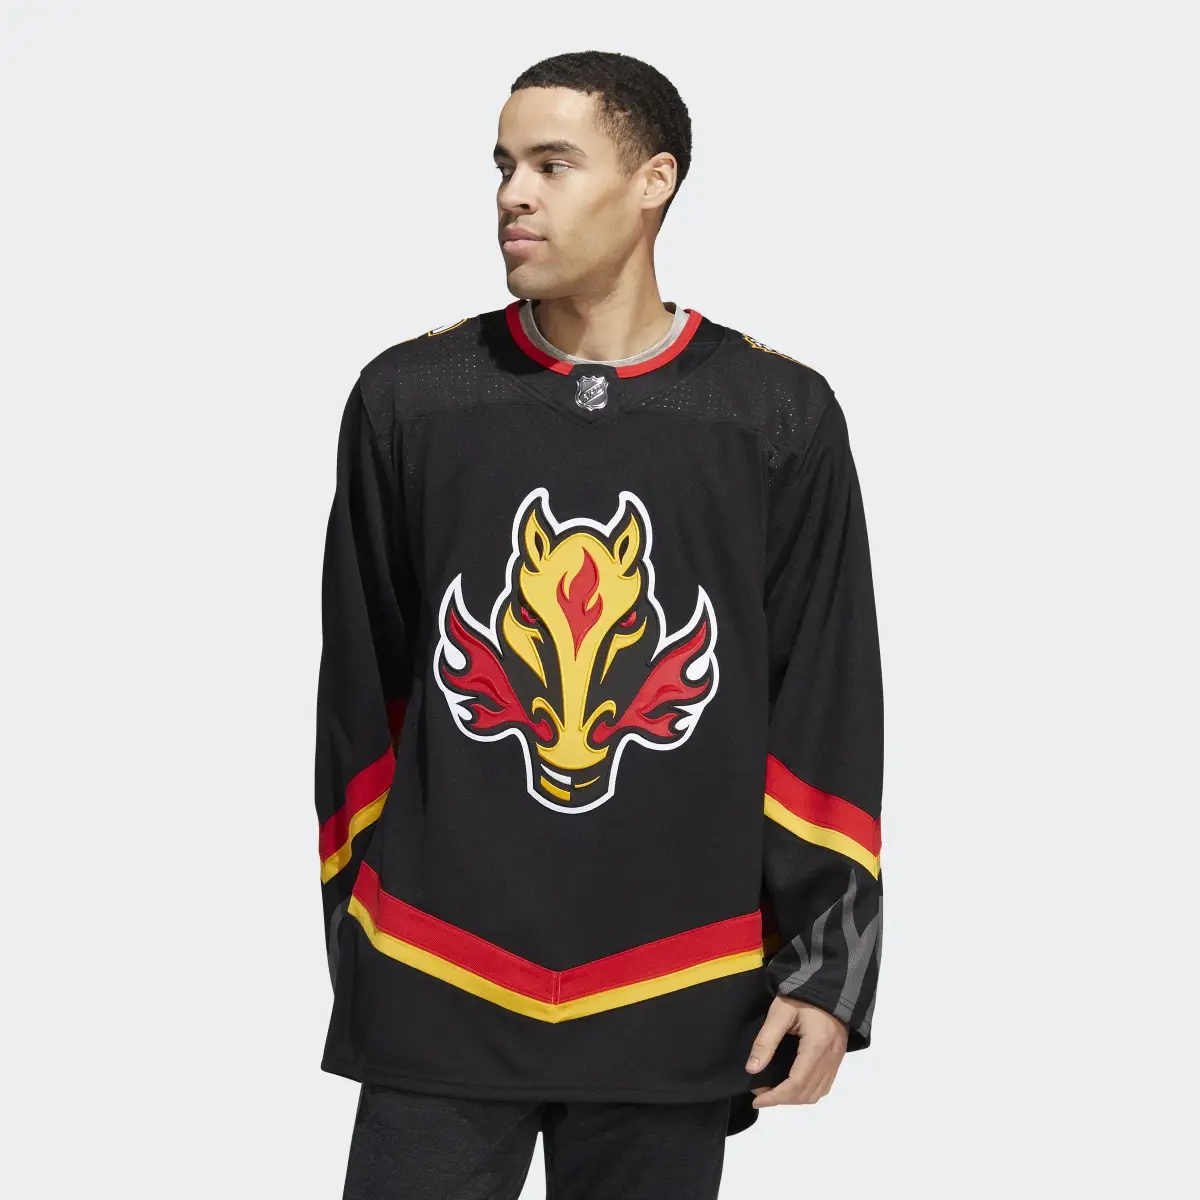 Adidas Flames Third Authentic Jersey. 2